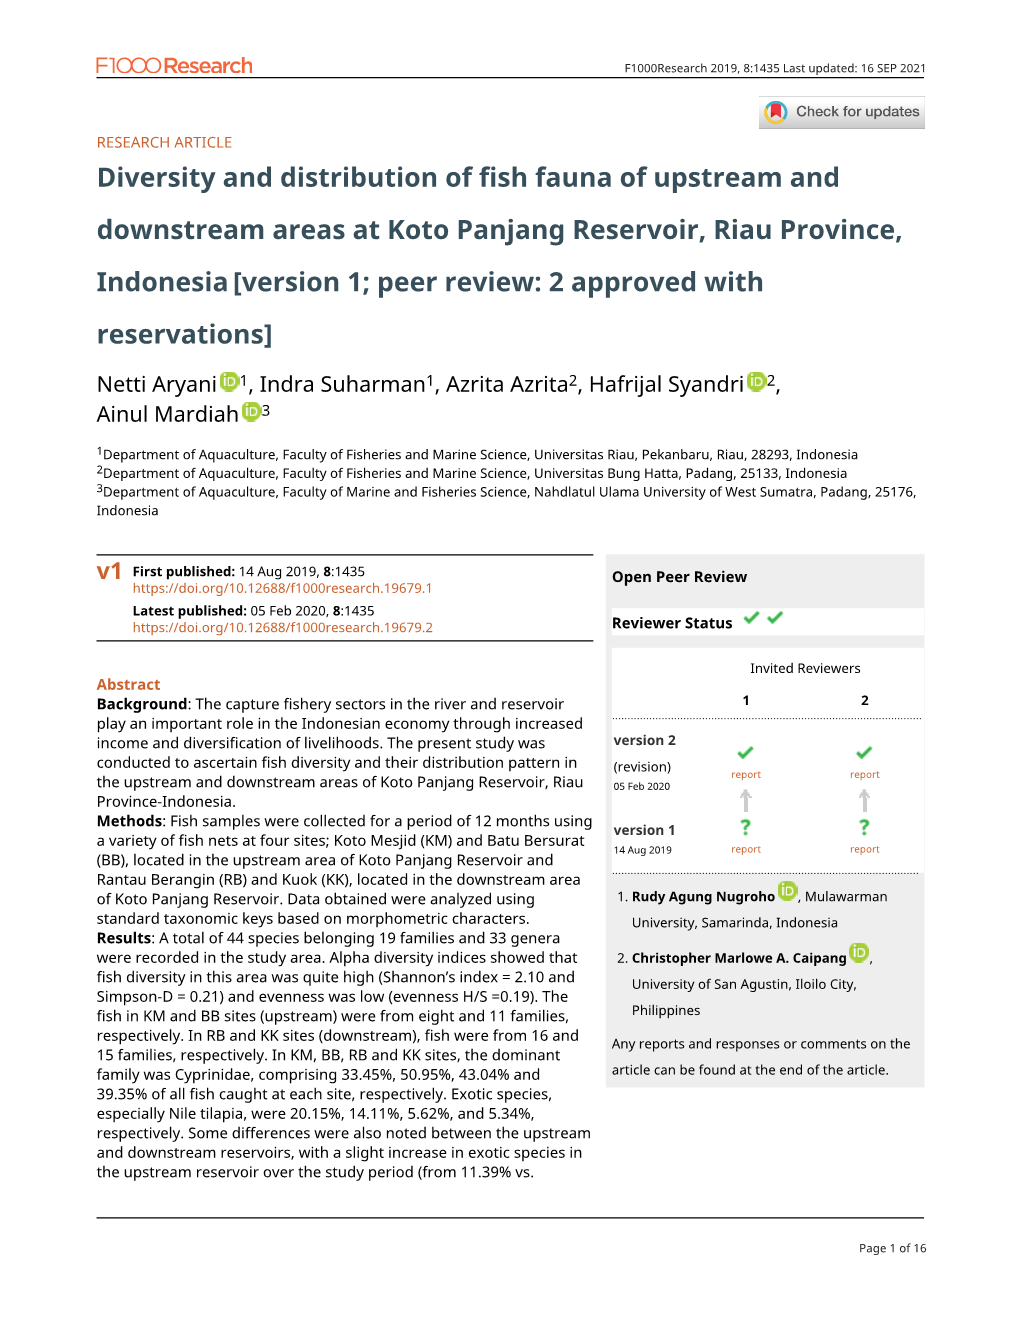 Diversity and Distribution of Fish Fauna of Upstream and Downstream Areas at Koto Panjang Reservoir, Riau Province, Indonesia[Ve